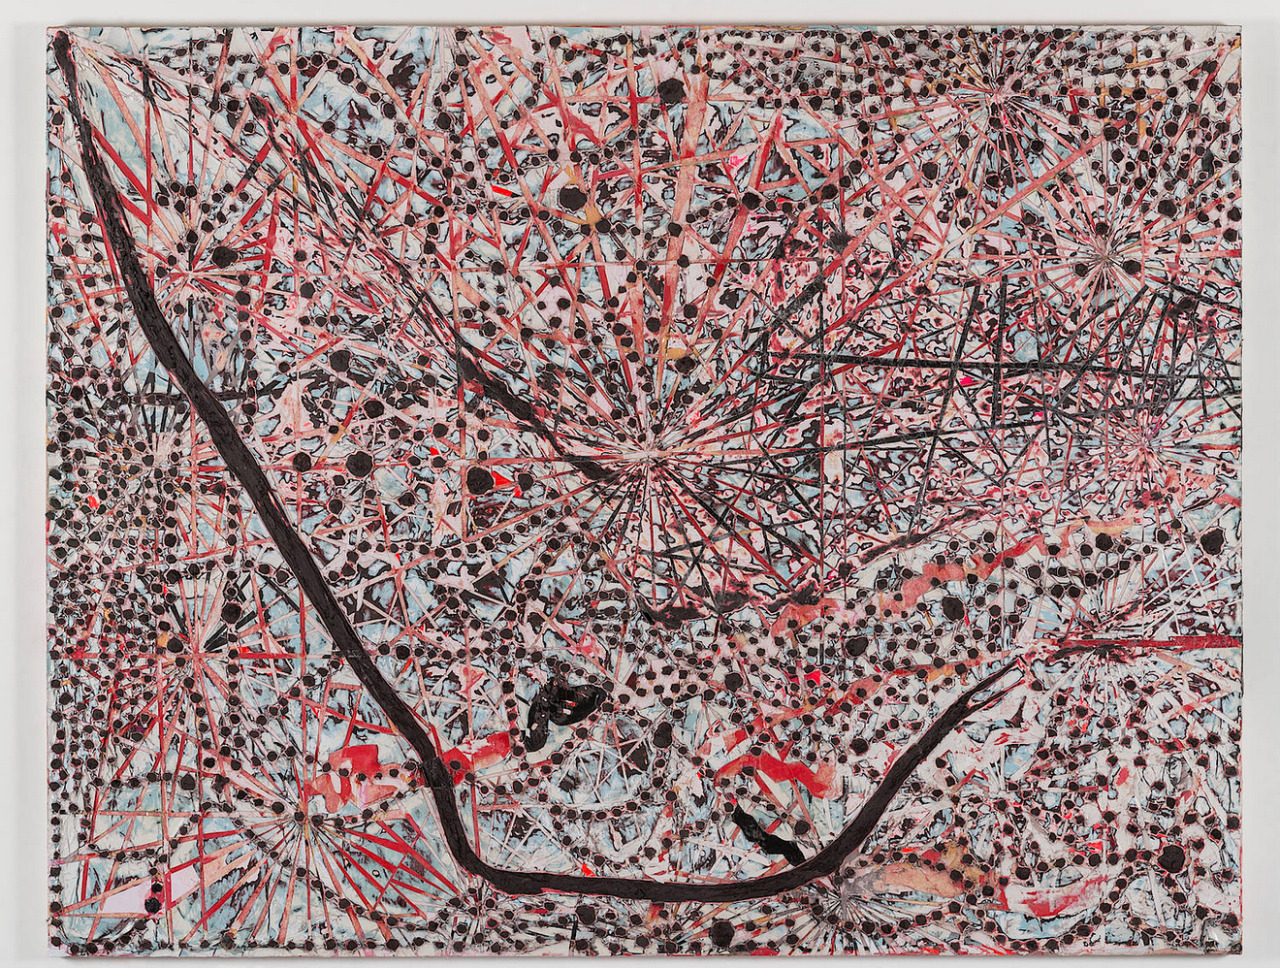 Painters' Painters — Mark Bradford, Scorched Earth opening June 20,...